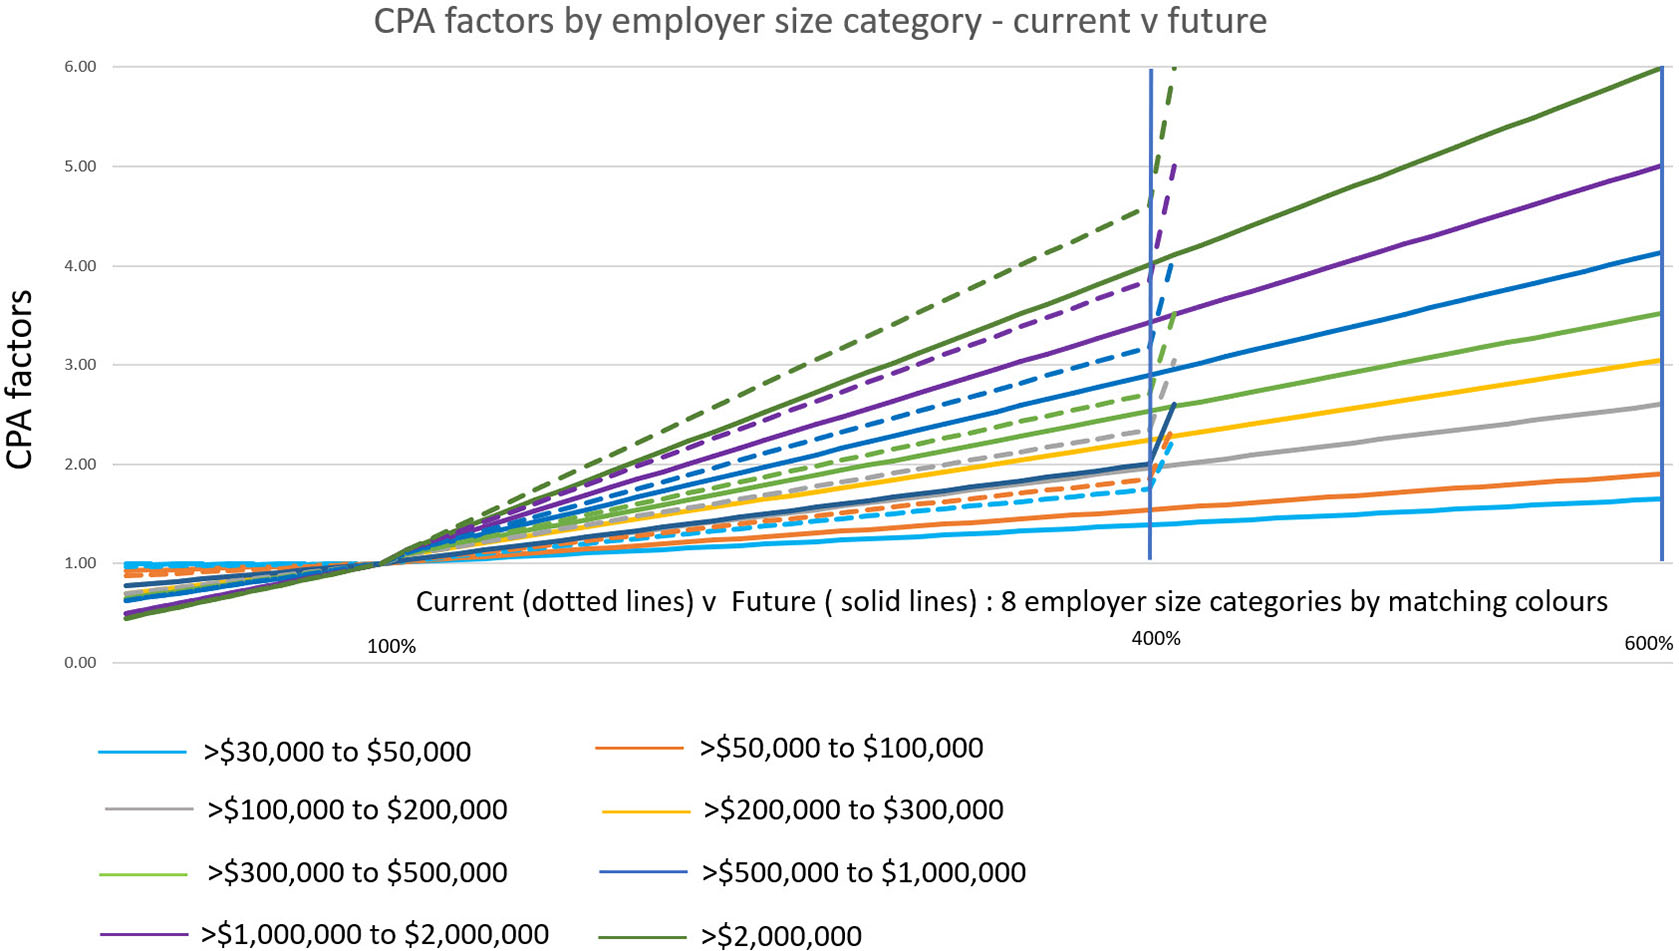 This graph shows CPA factors by employer size category - current, showing up to 400 per cent, shown in dotted lines, verse future, up to 600 per cent, shown in solid lines. 